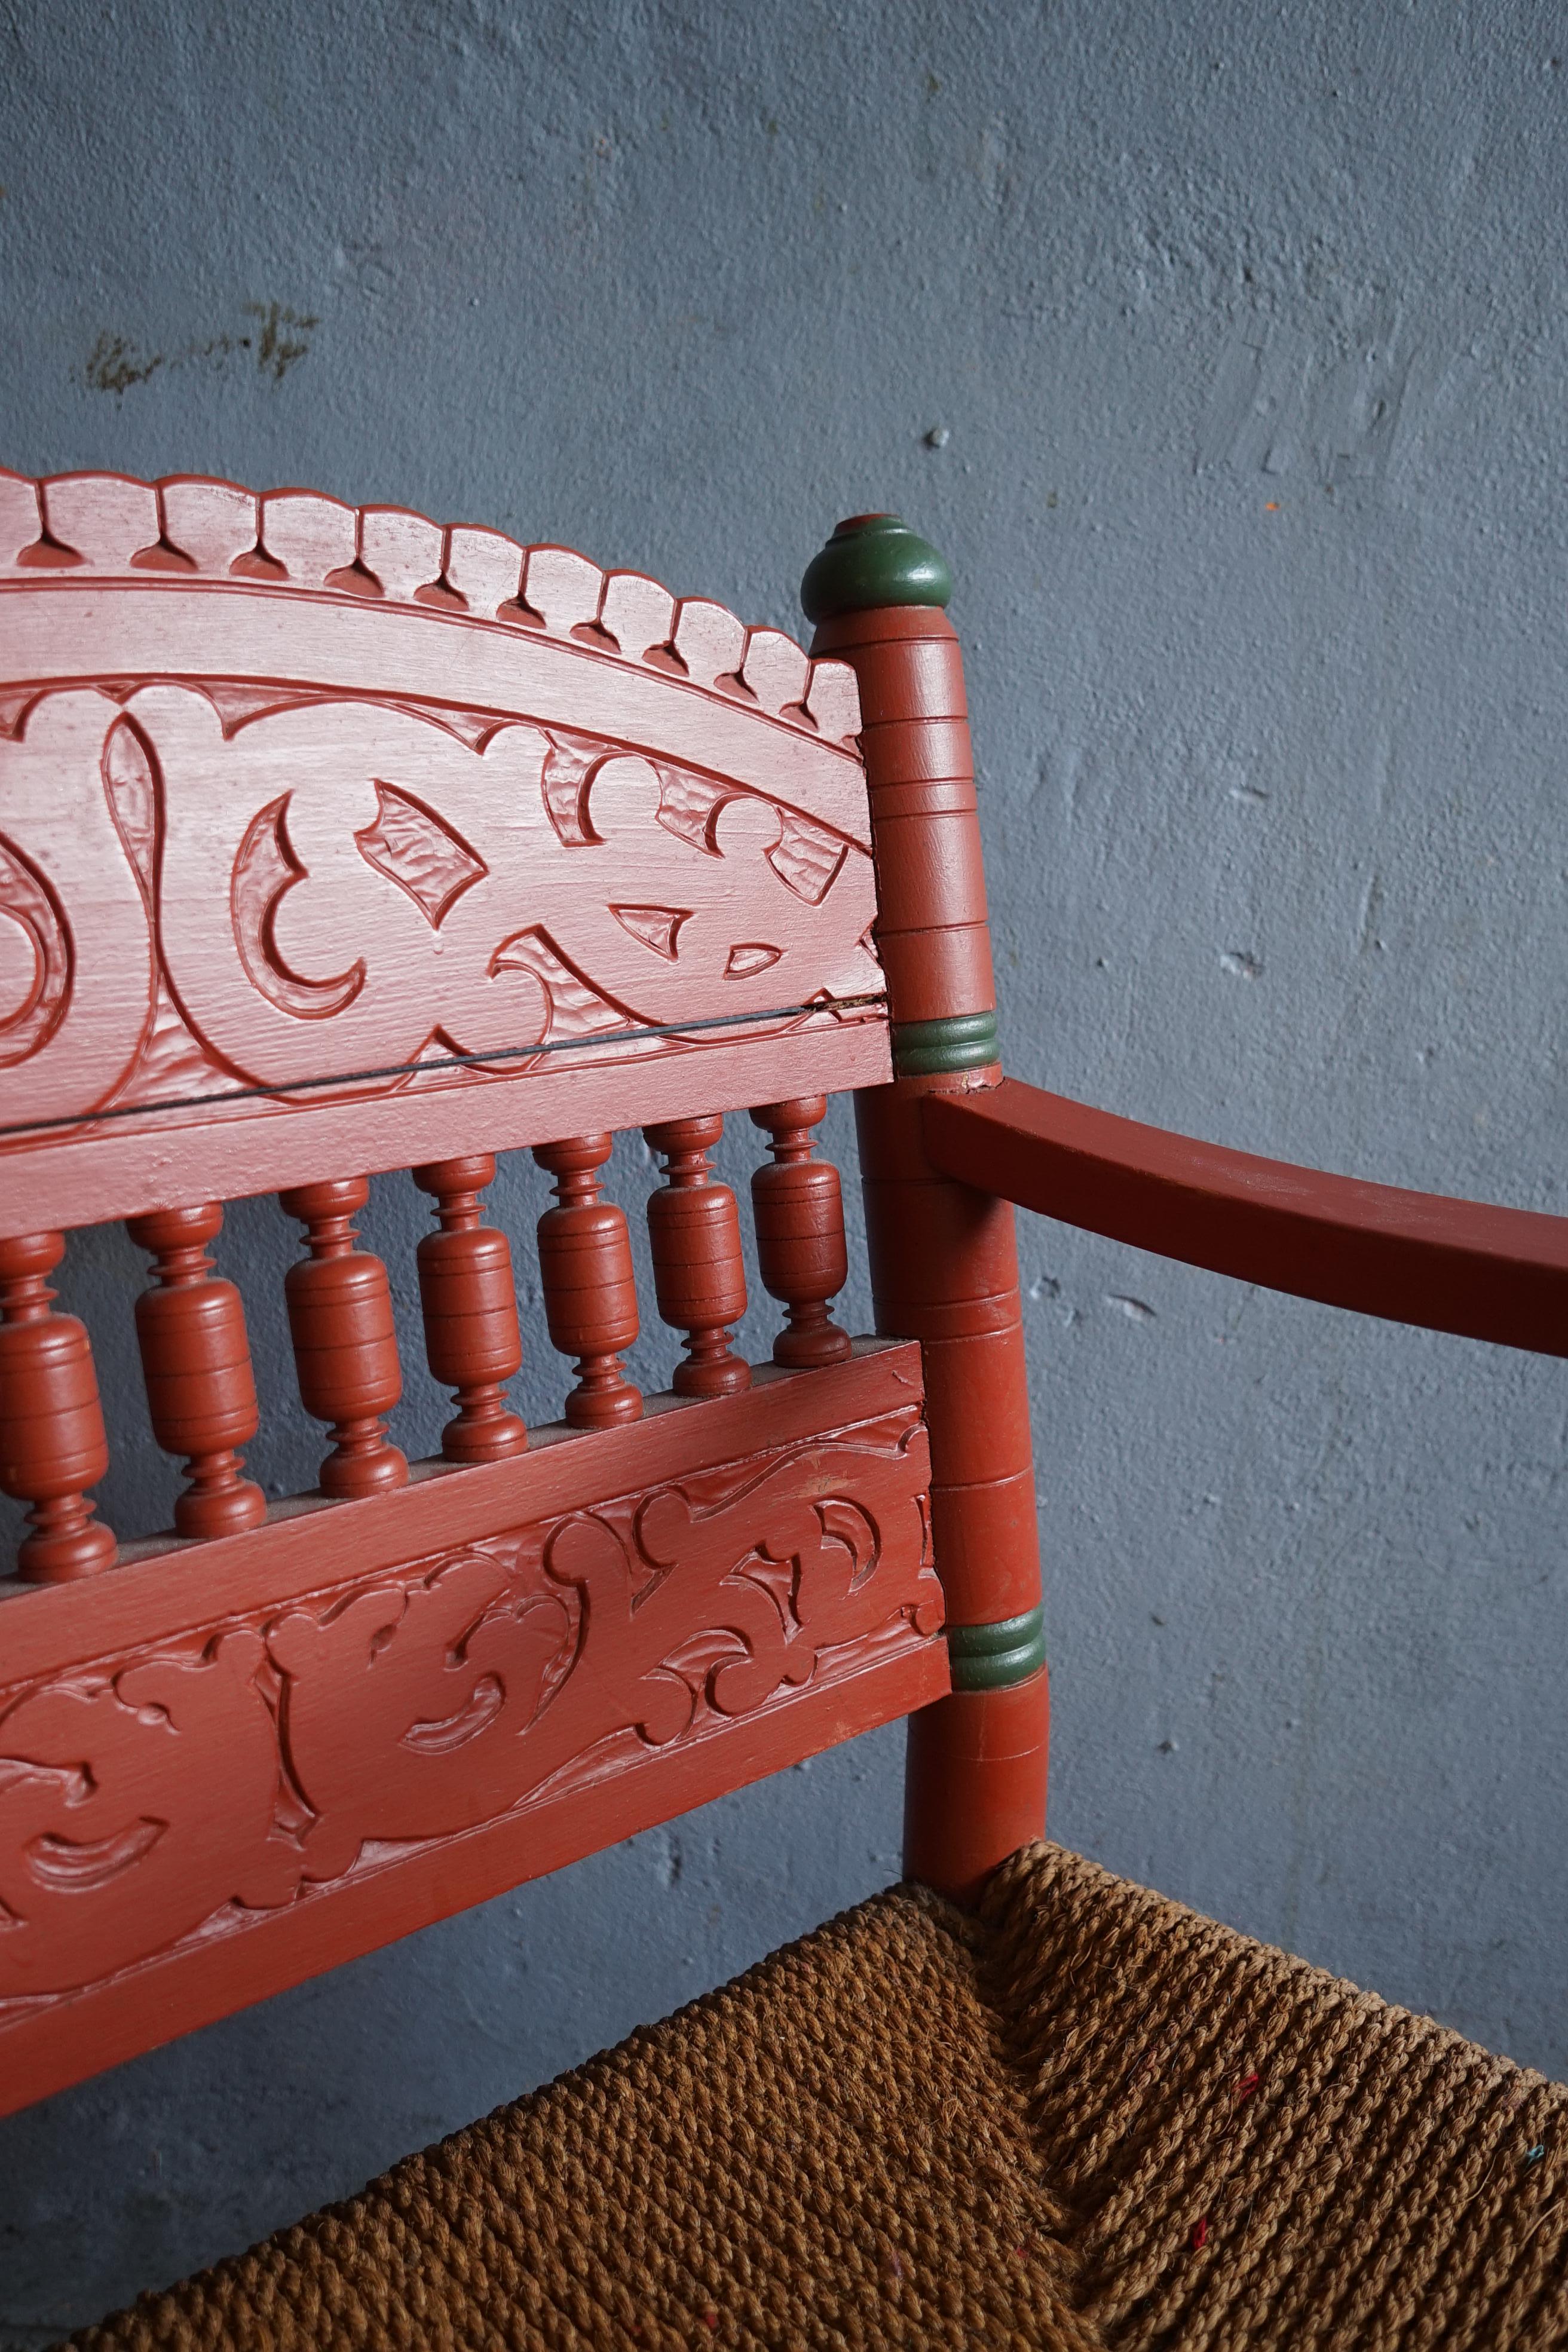 Decorative Rare Norwegian folk art chair with the original red and green painted wood and the original sea grass webbing from the 1850’s.

The chair is made in solid wood by a skilled craftsman and has a beautiful detailed carving in the backrest of